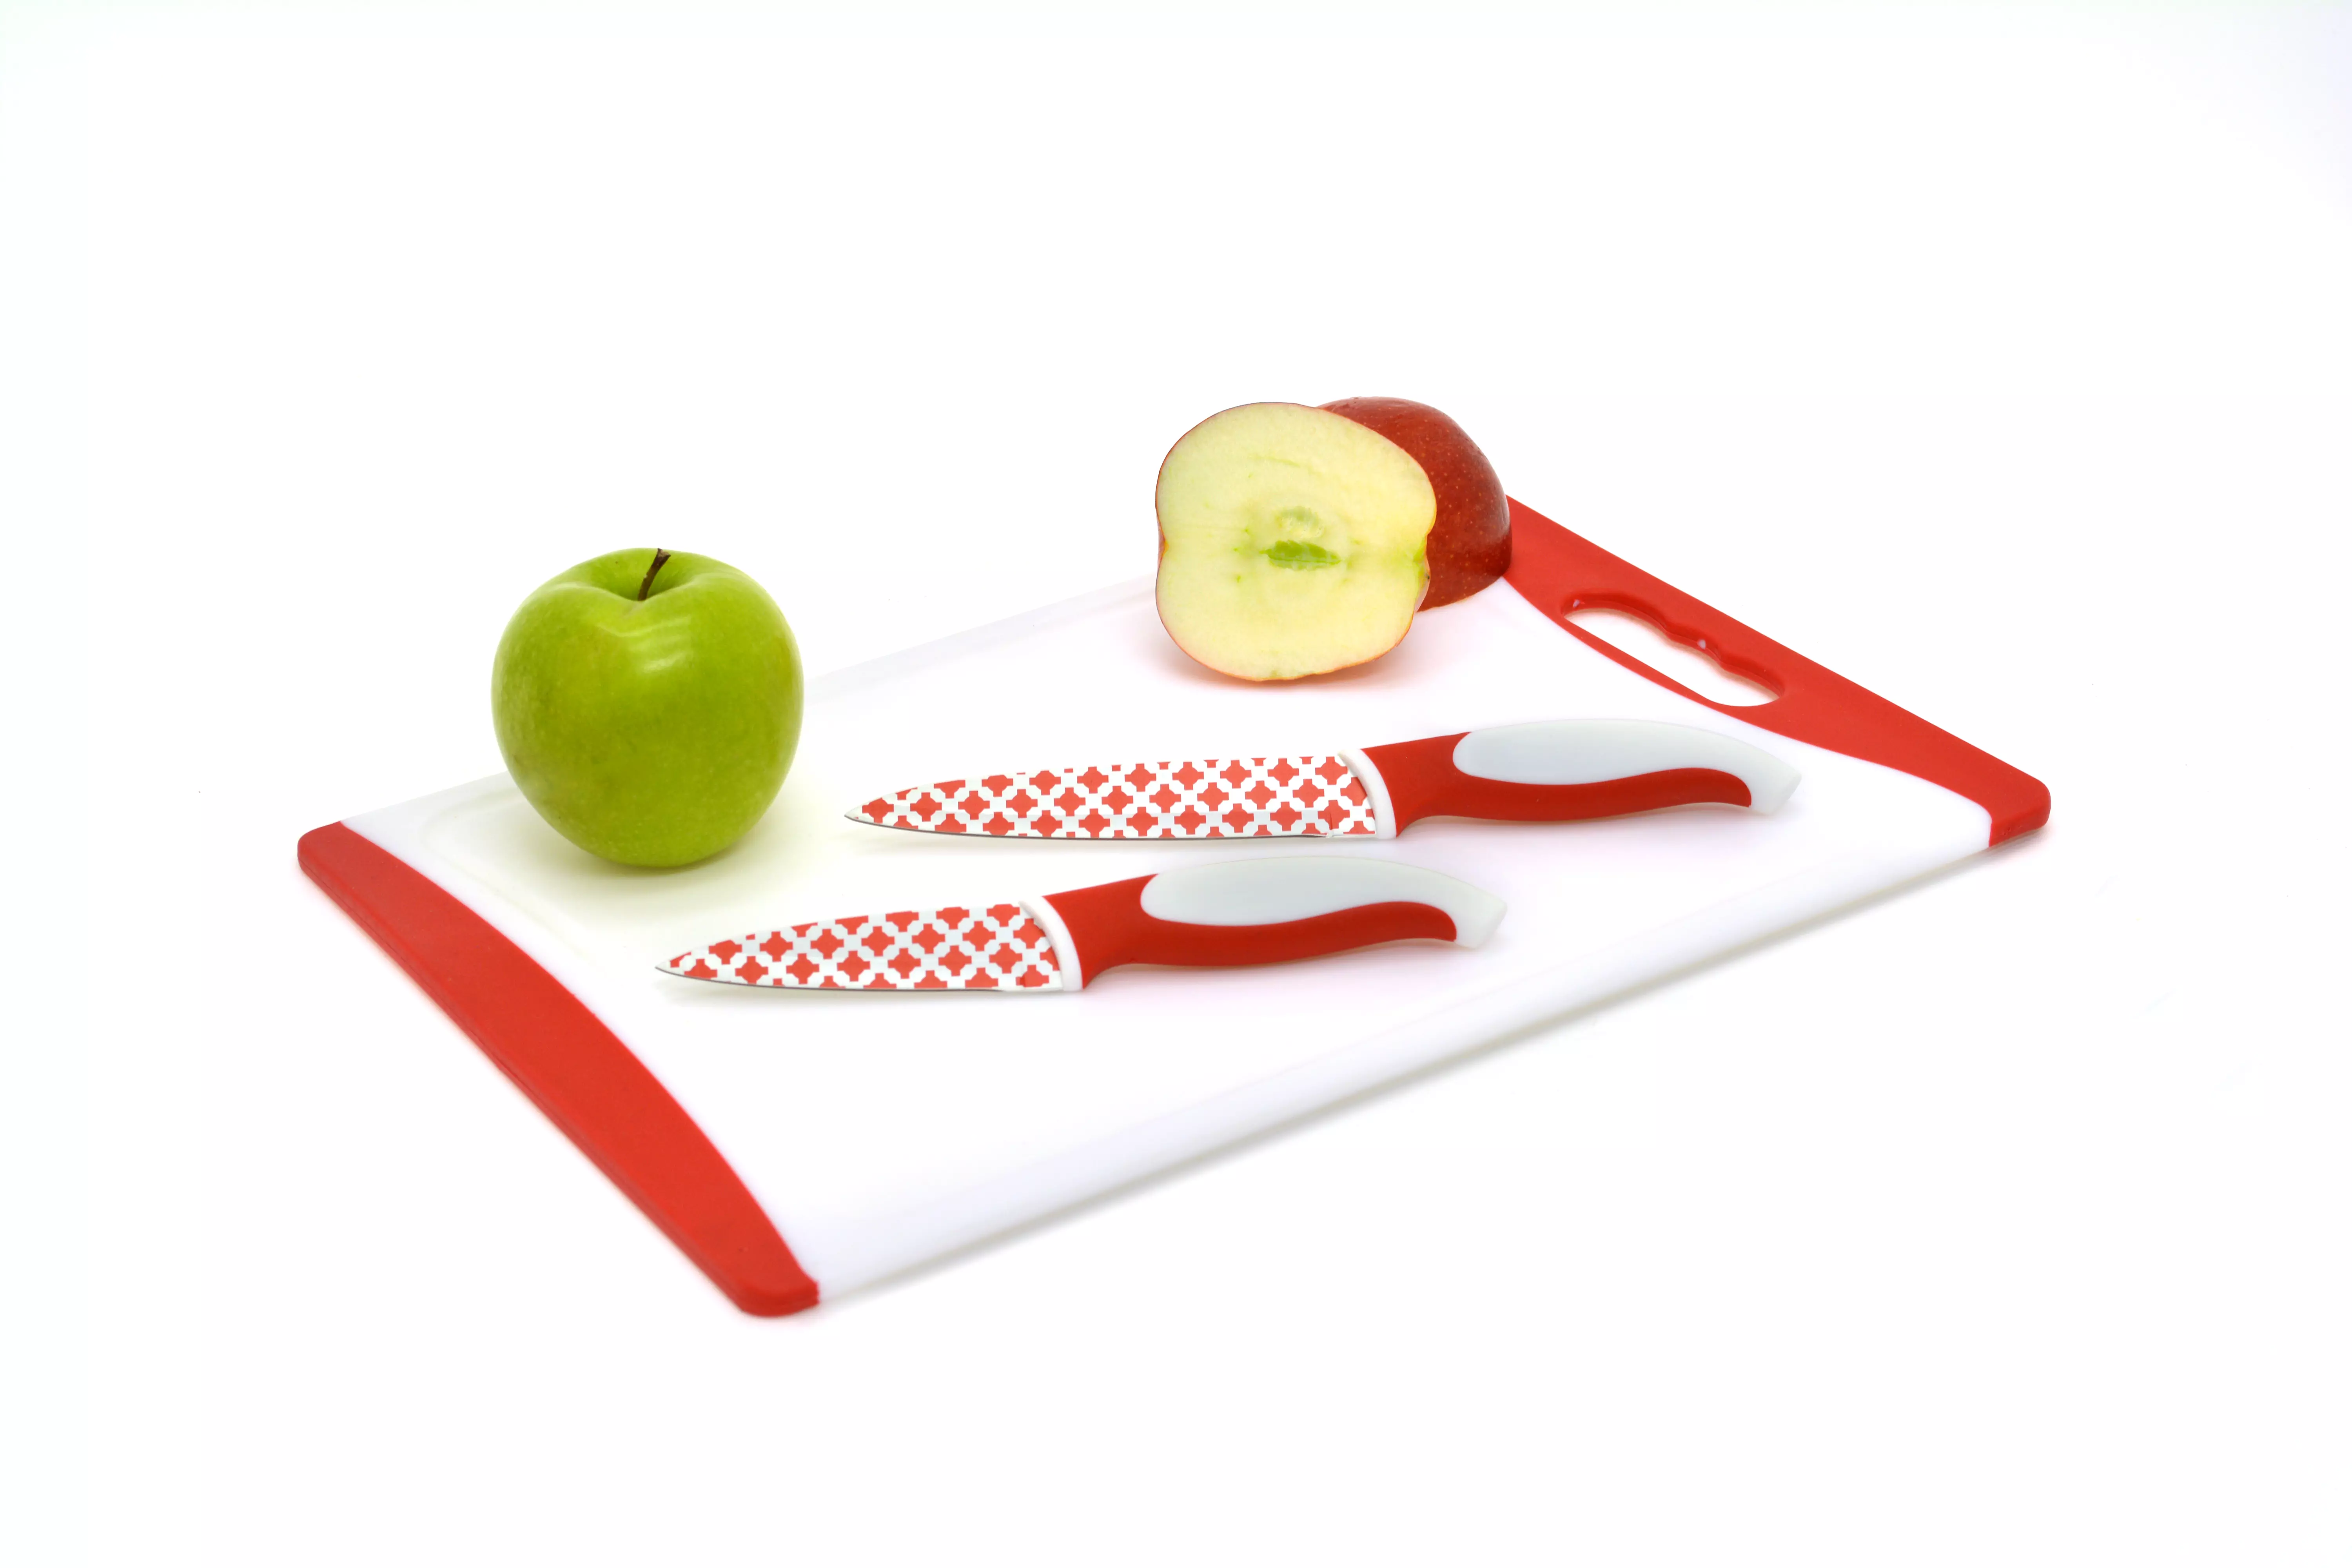 What type of cutting board is right for you?